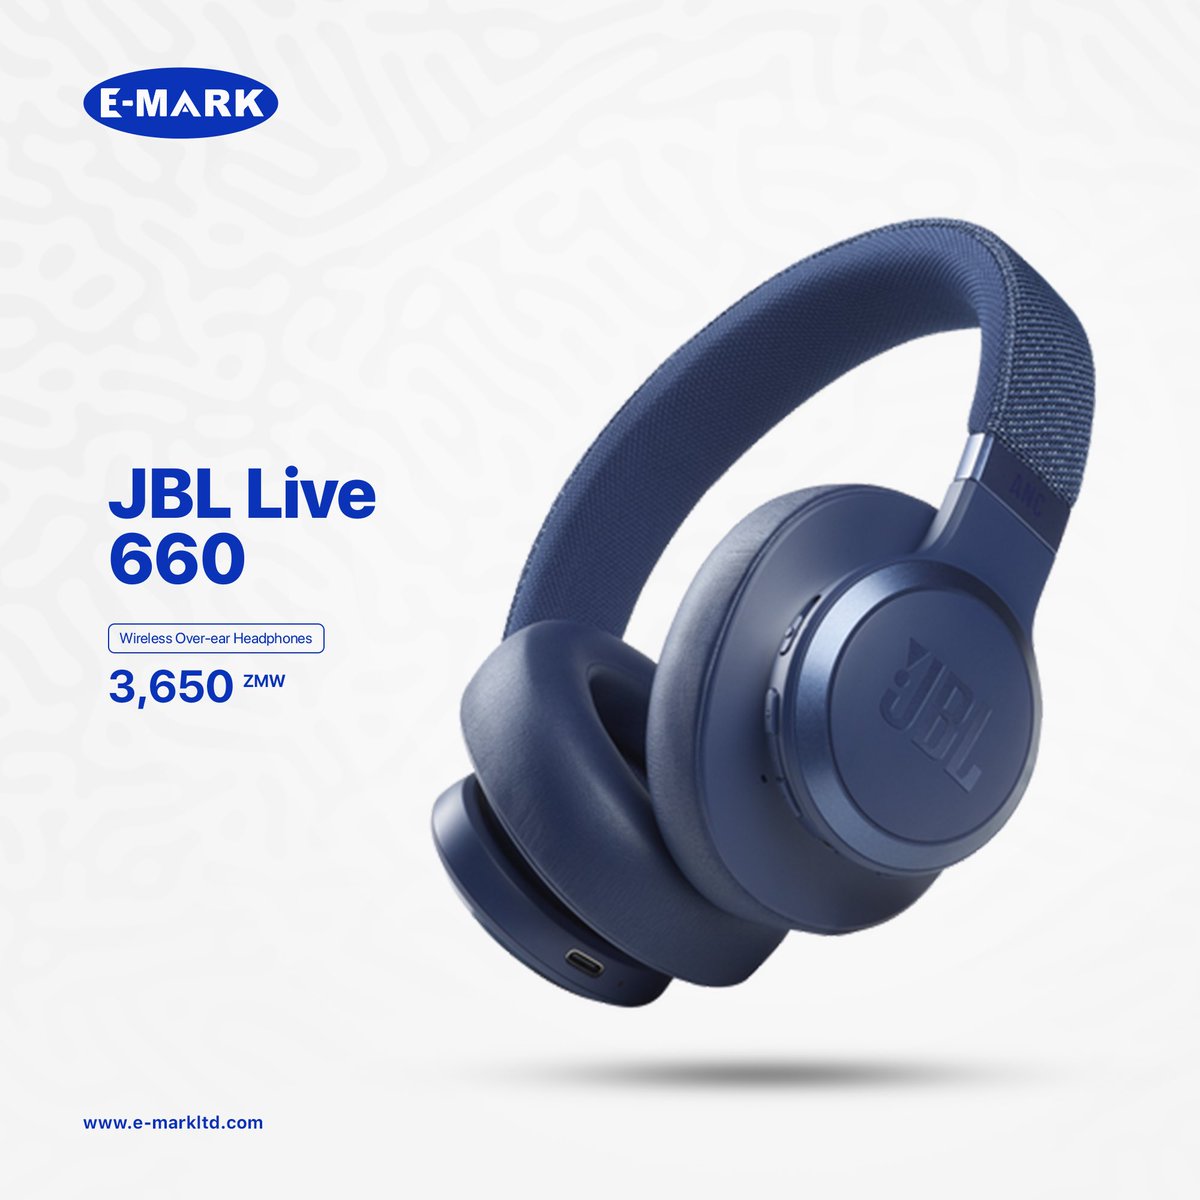 Experience long-lasting comfort with cushioned earcups and adjustable headband with the JBL live 660 with active noise cancellation. Live life loud with sound that moves. #JBL #Live660 #ConnectingPeople